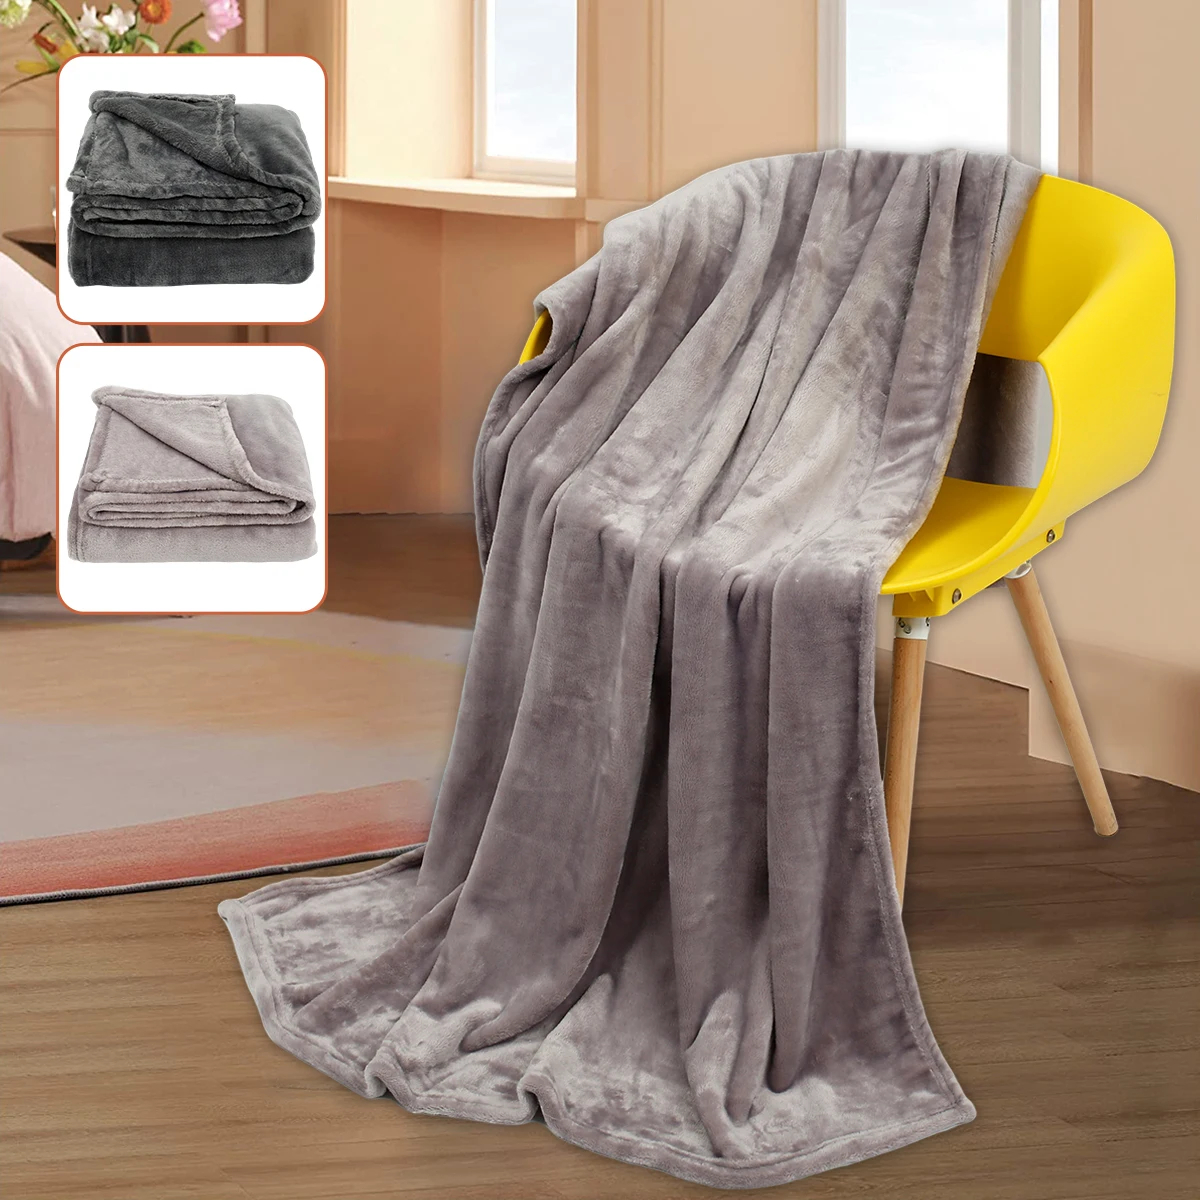 

Gray Fleece Blanket Super Soft Fuzzy Blanket Light Weight Plush Bed Blankets Durable Plush Cozy Blanket Perfect for Bed Sofa